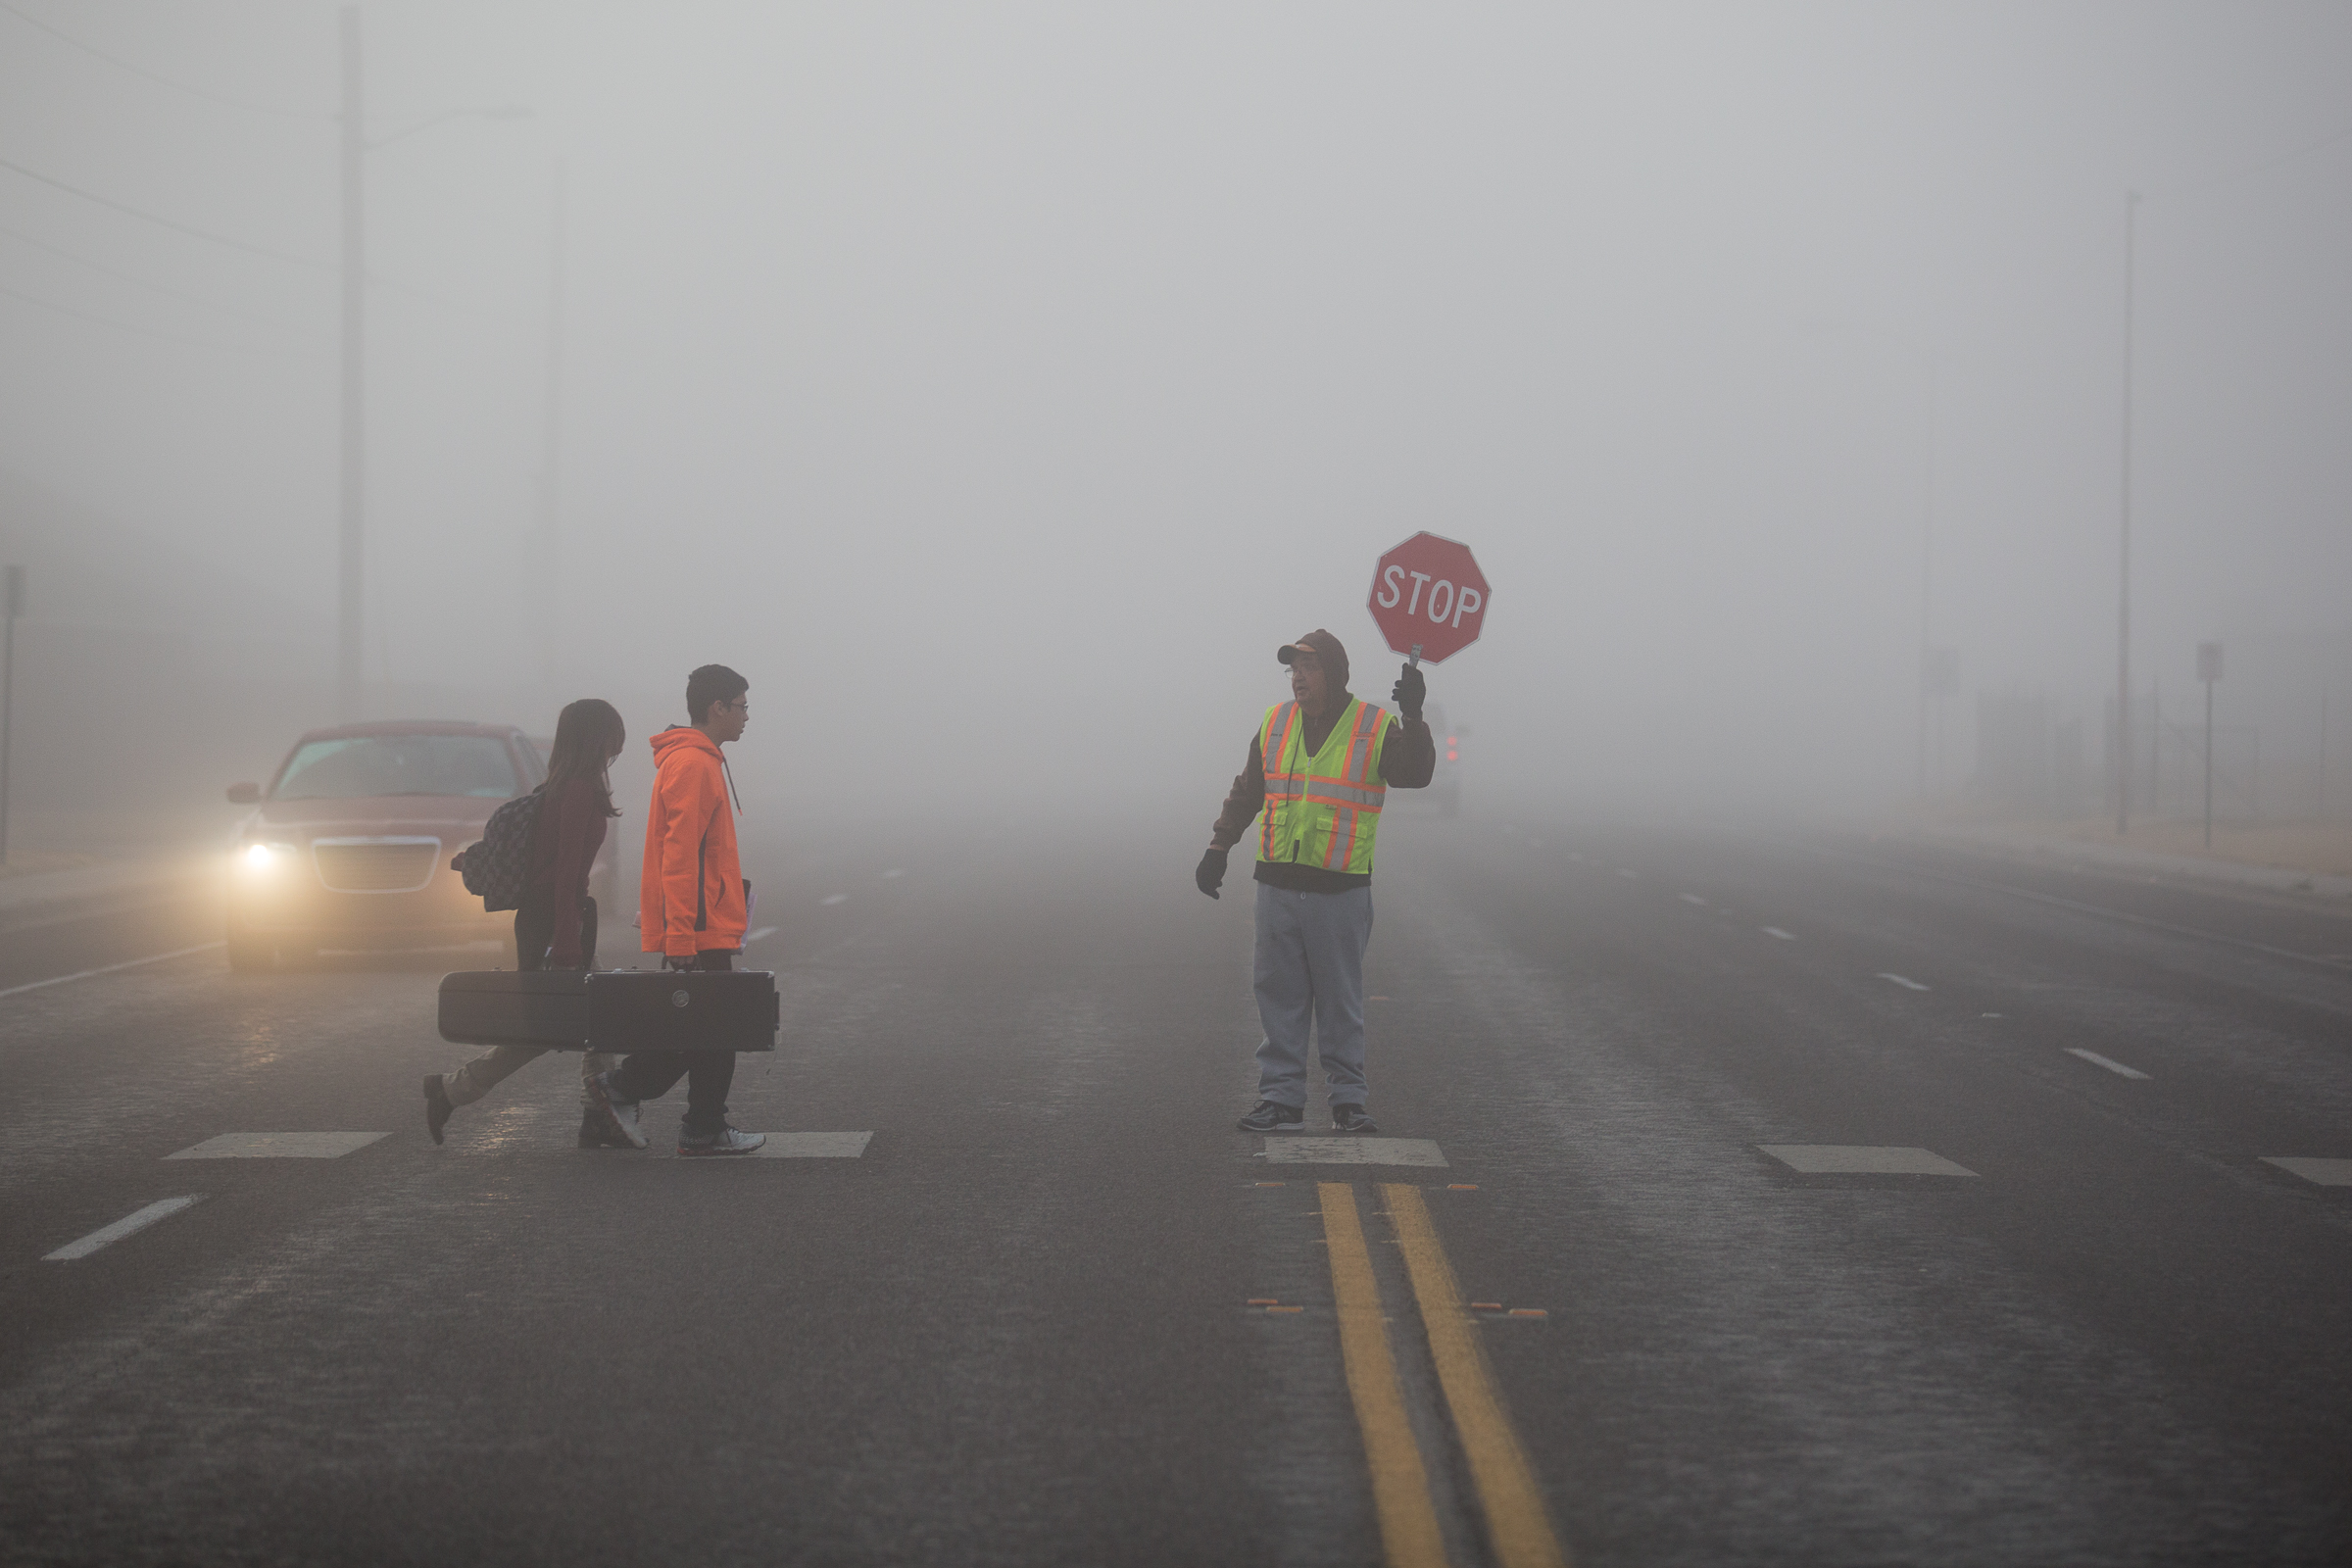 PHOTO: A crossing-guard stops traffic along Rainbow Drive as students cross the street during heavy fog in Odessa, Texas on Tuesday, Dec. 9, 2014.